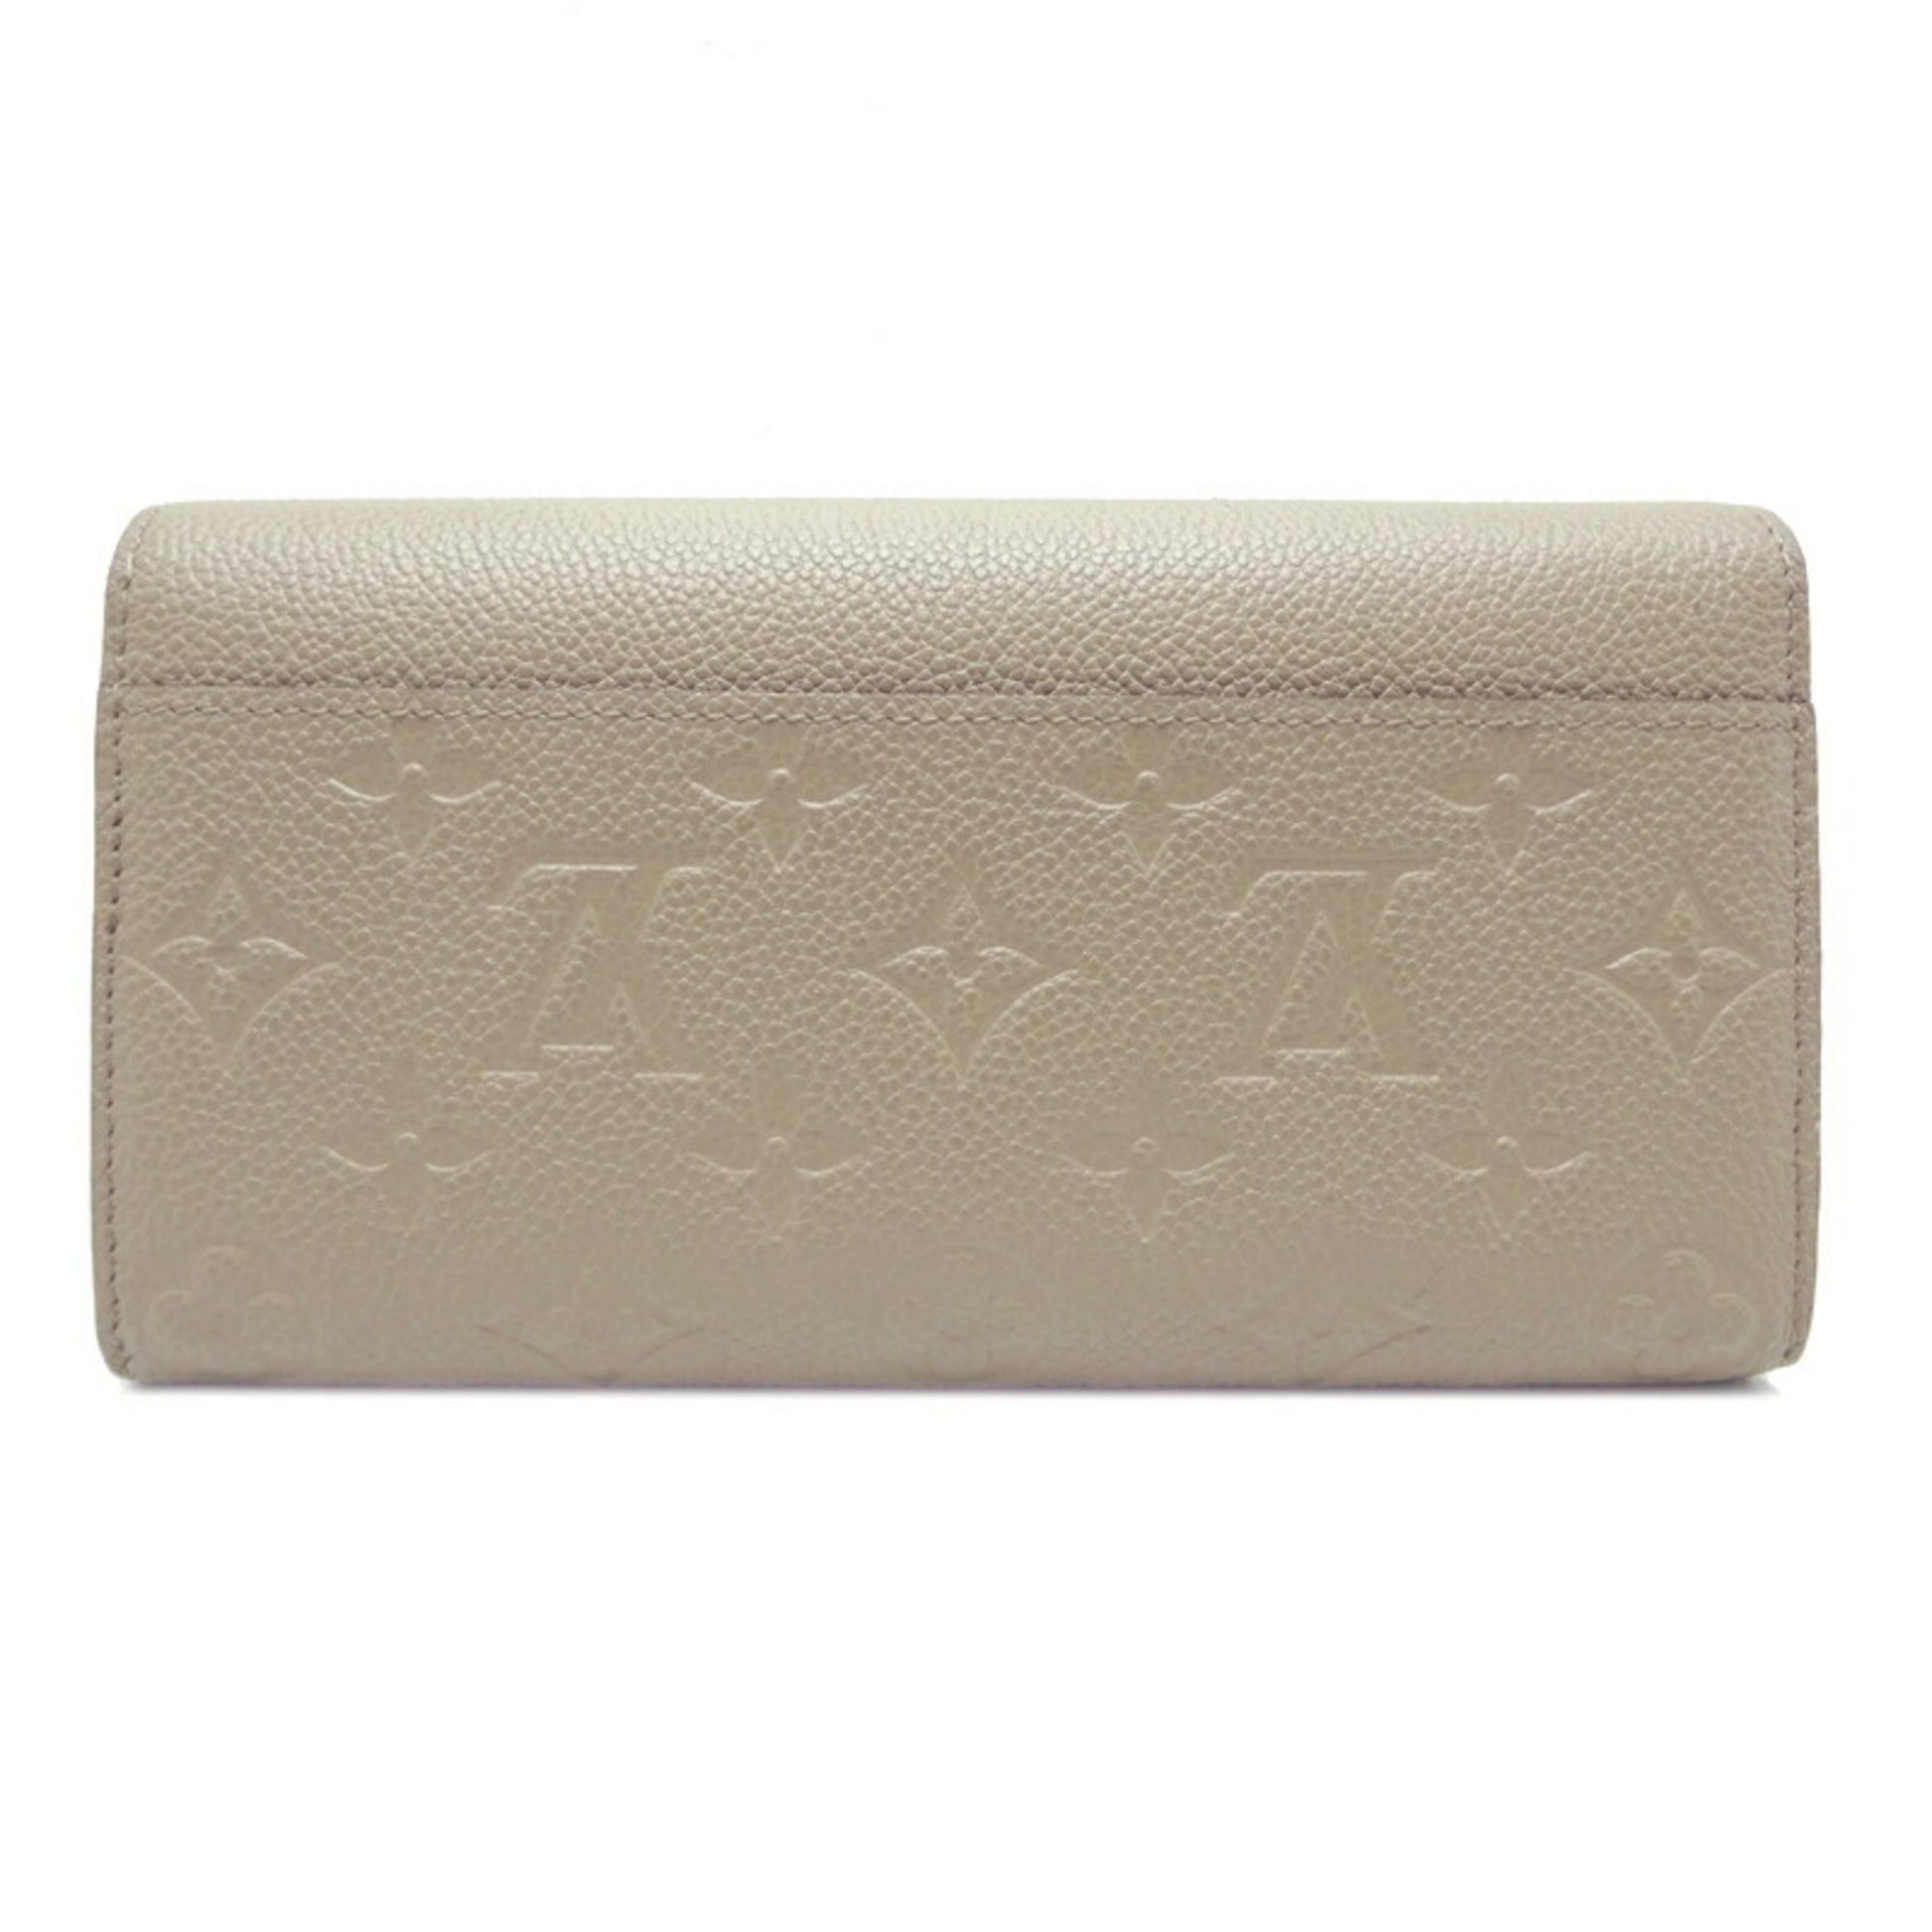 Sarah leather wallet Louis Vuitton Beige in Leather - 29466475